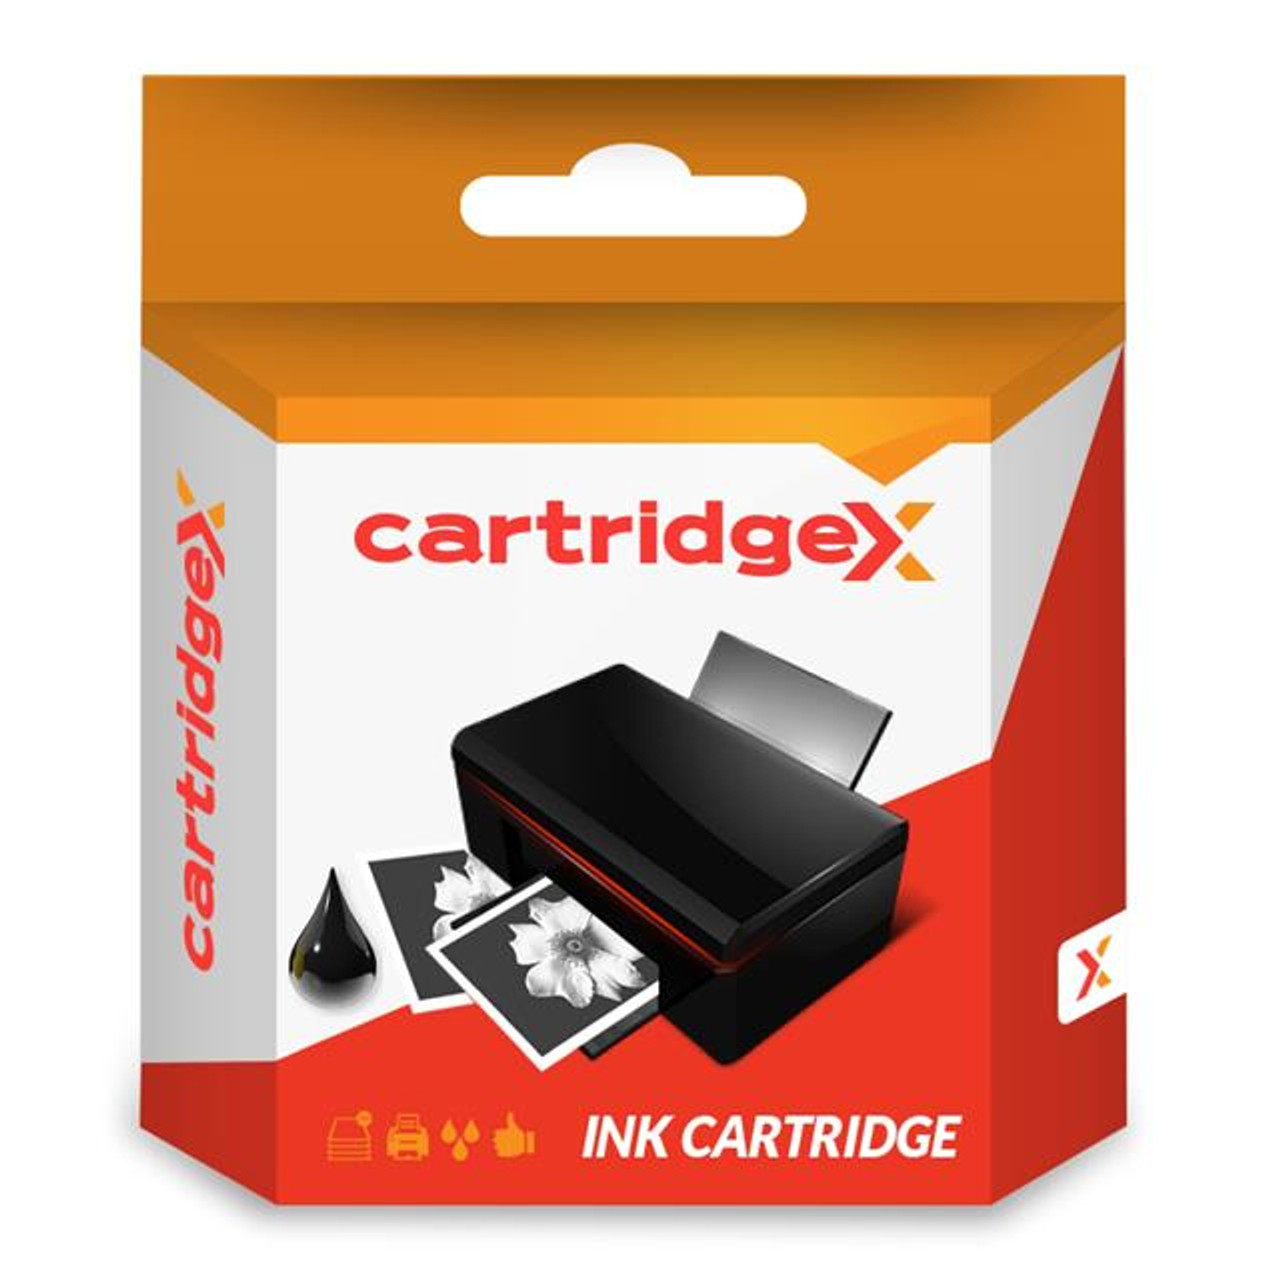 Compatible Black Ink Cartridge For Hp 56 Psc 2108 2110 2110v 2110xi C6656a